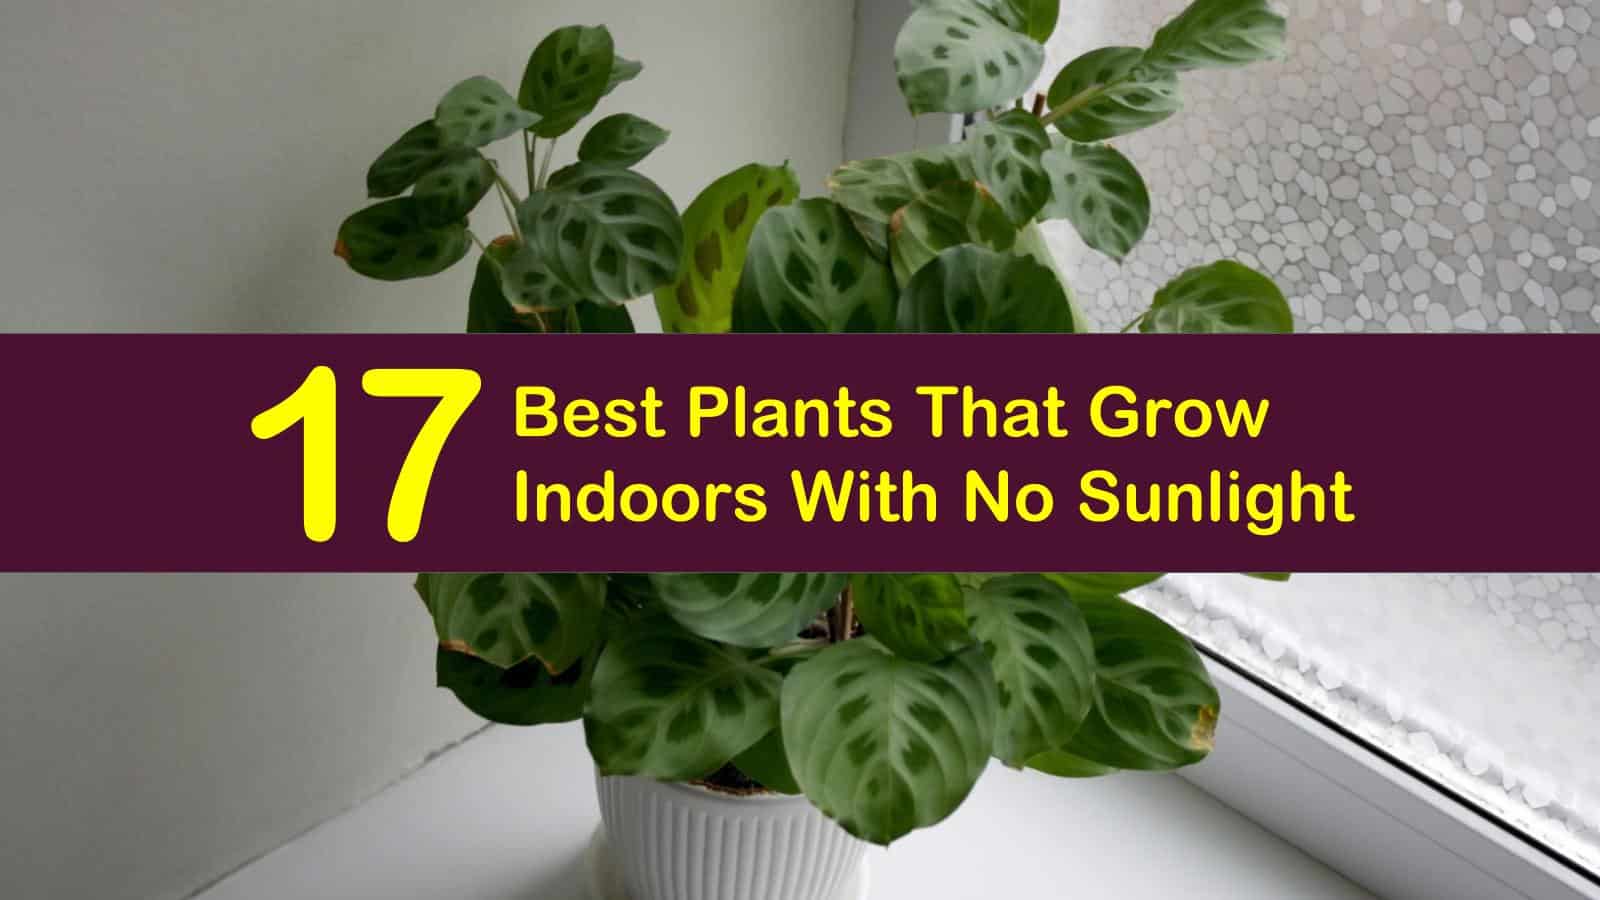 17 Best Plants That Grow Indoors With No Sunlight